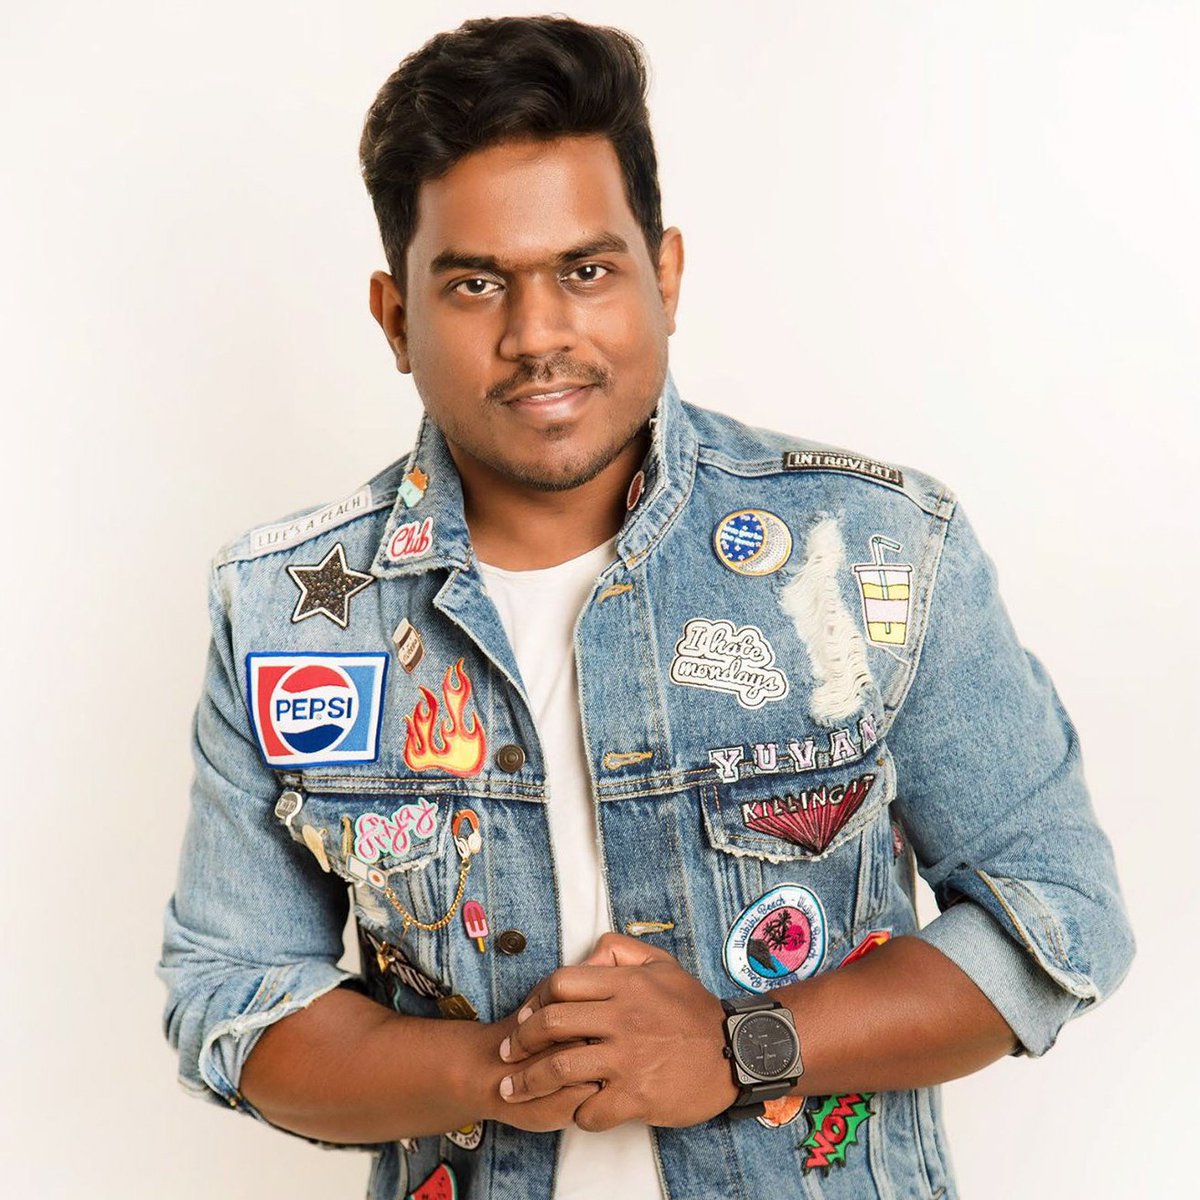 #U1-ன் Unique Songs..🎶 - raaga.com/a/TC0001667-pl…
Yuvan's music connects our hearts!

@thisisysr  ​#lovesong ​​#tamilmusic ​#tamilsong ​​​#tamilmovie ​​​#raaga ​​​#raagamusicschool